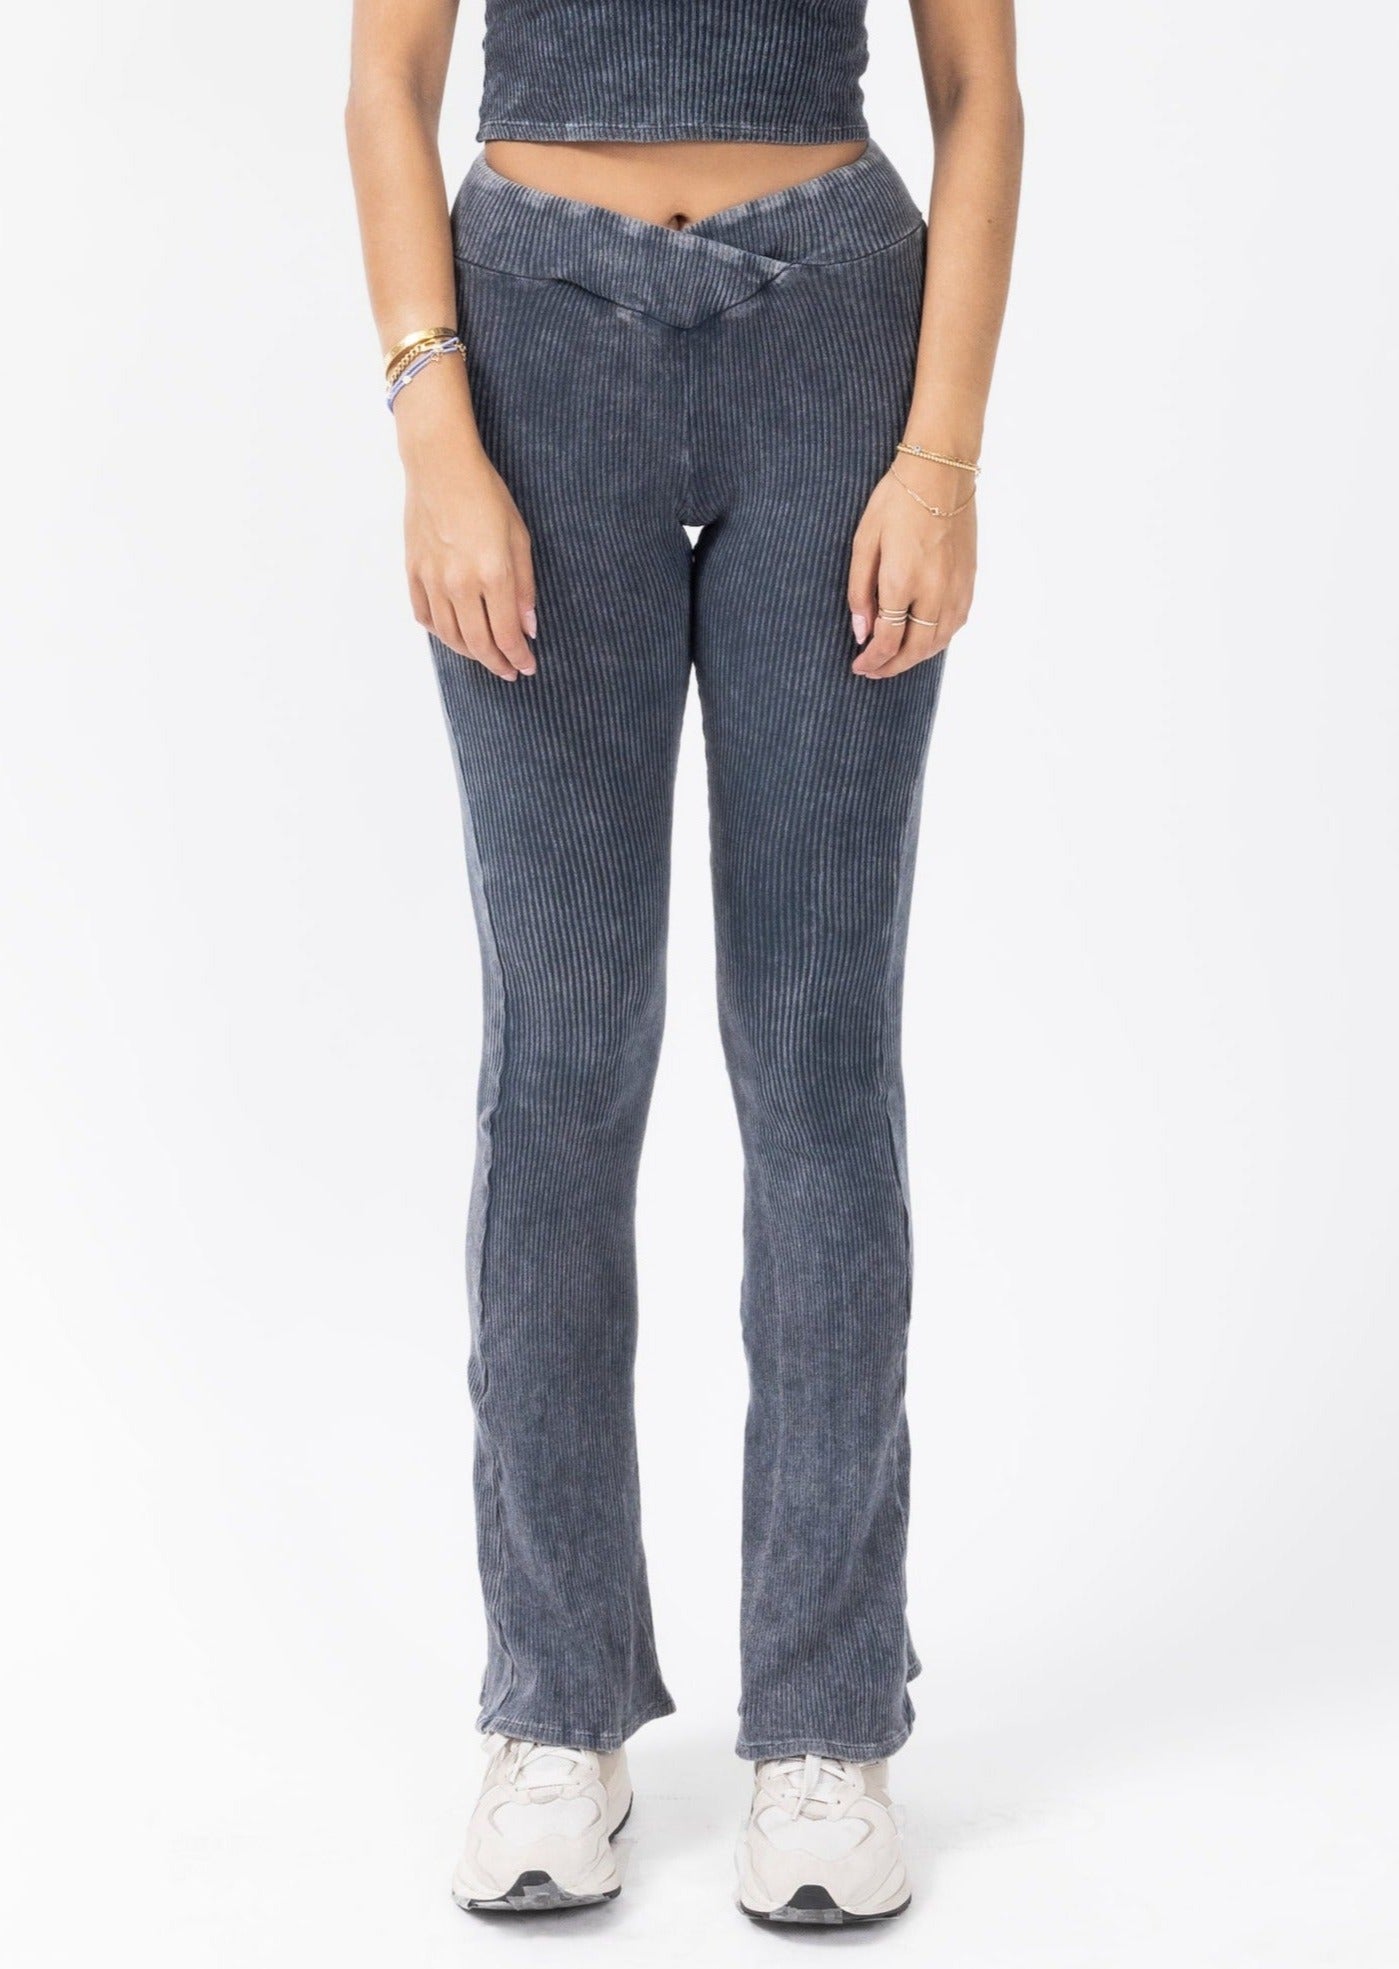 Barstow Crossover Vintage Lounge Pant Charcoal